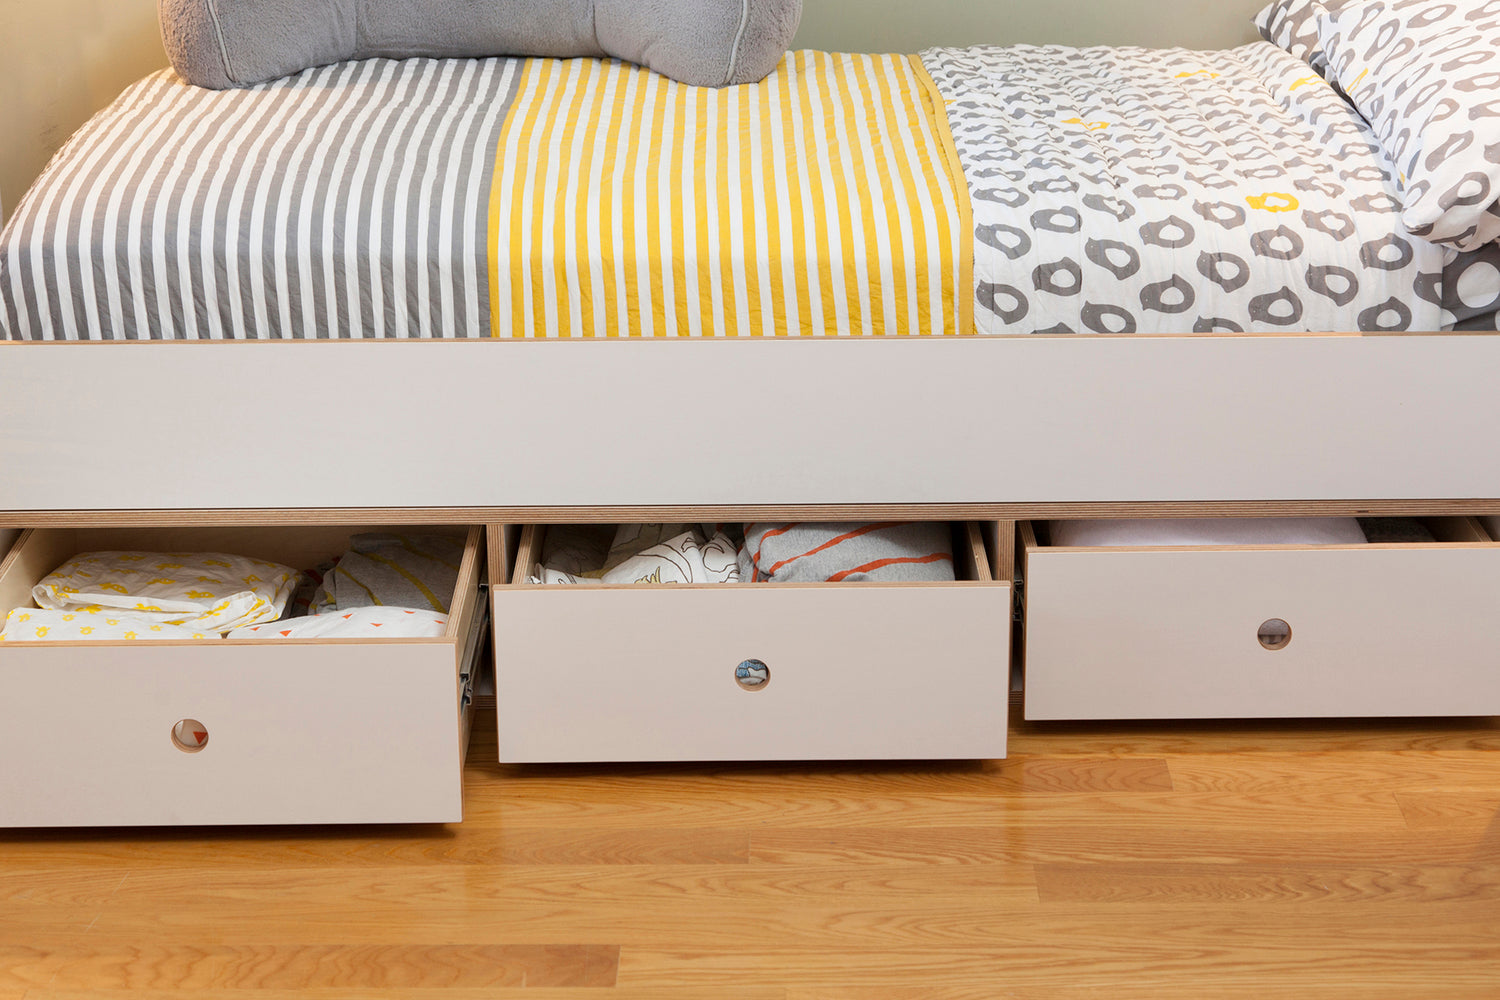 Bed with storage drawers, one open with contents visible.